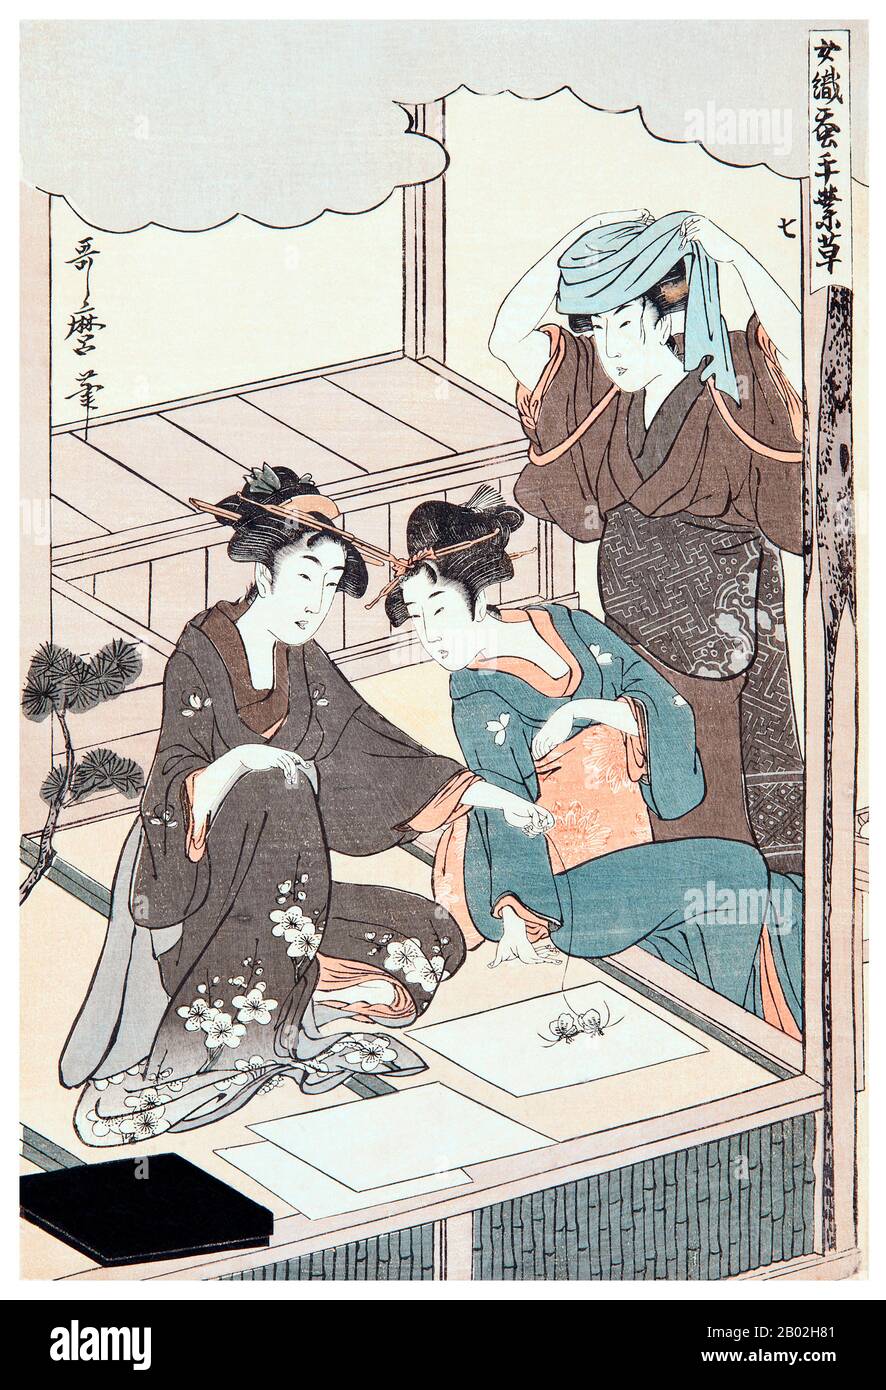 7. 'The emergence of the moths', depicting two girls watching moths lay eggs on a piece of paper, another standing and looking at the scene.  Kitagawa Utamaro (ca. 1753 - October 31, 1806) was a Japanese printmaker and painter, who is considered one of the greatest artists of woodblock prints (ukiyo-e). He is known especially for his masterfully composed studies of women, known as bijinga. He also produced nature studies, particularly illustrated books of insects. Stock Photo